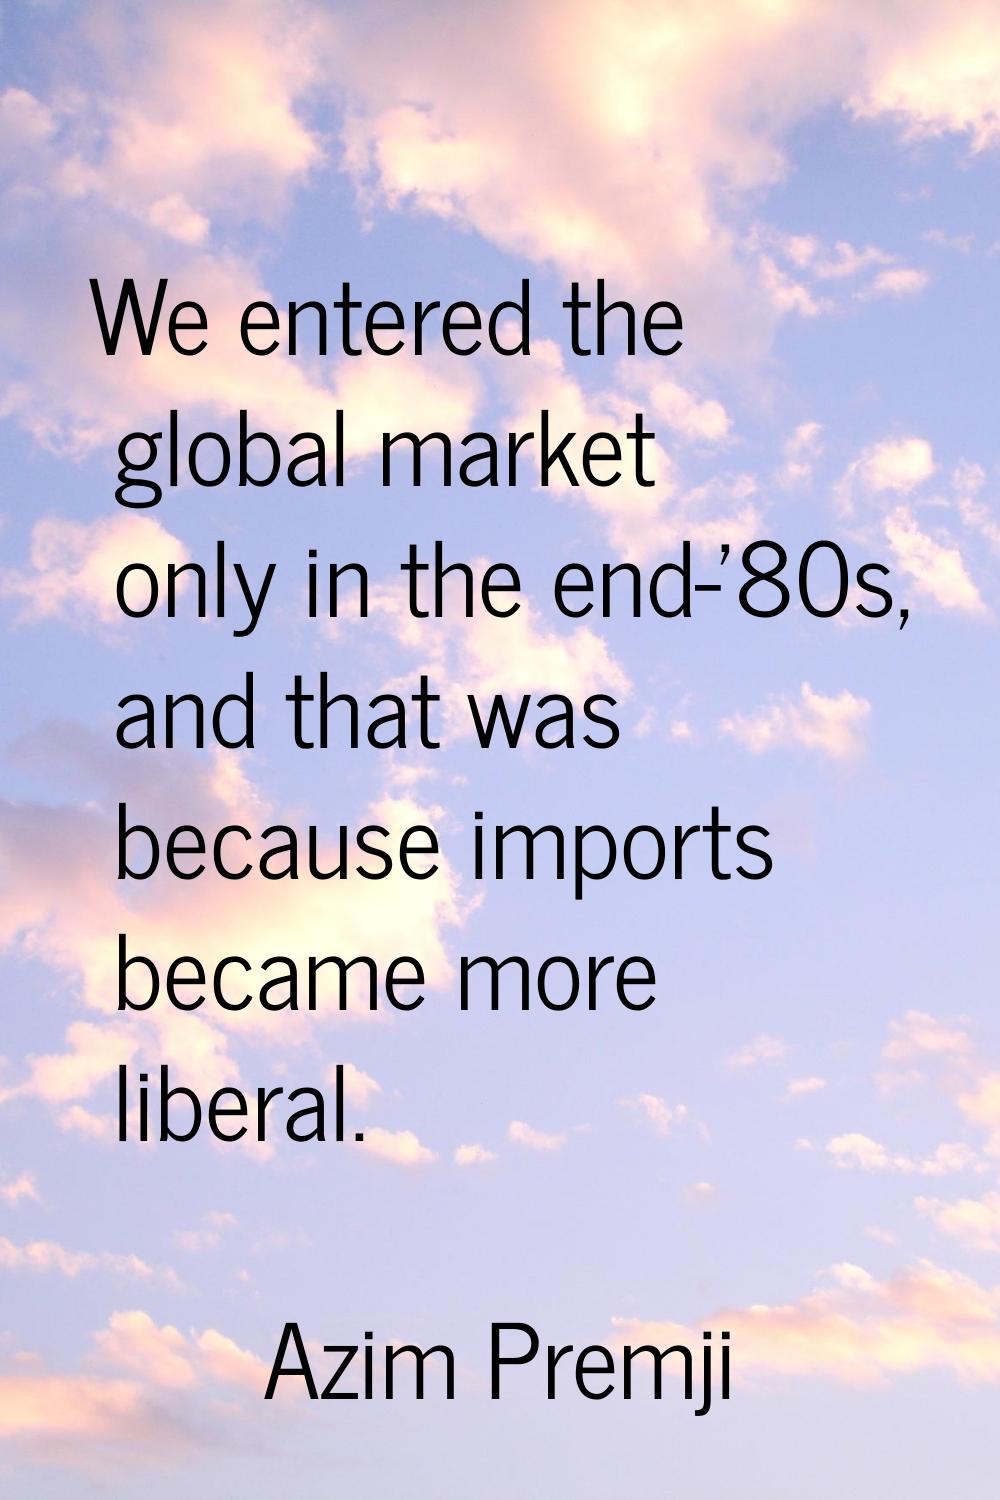 We entered the global market only in the end-'80s, and that was because imports became more liberal